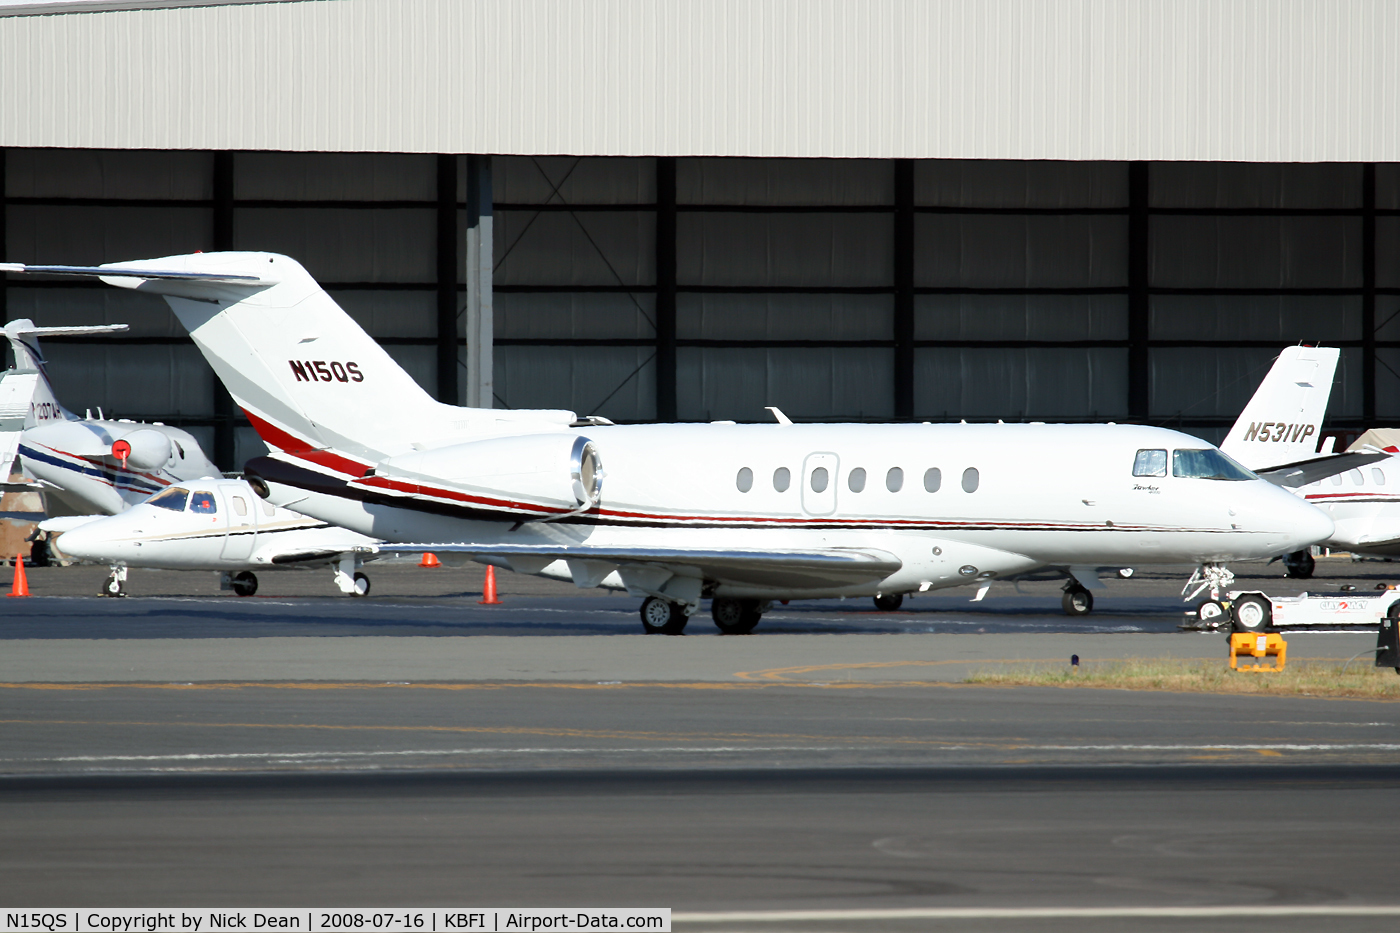 N15QS, 2006 Hawker Beechcraft 4000 C/N RC-6, What a debacle this aircraft turned out to be